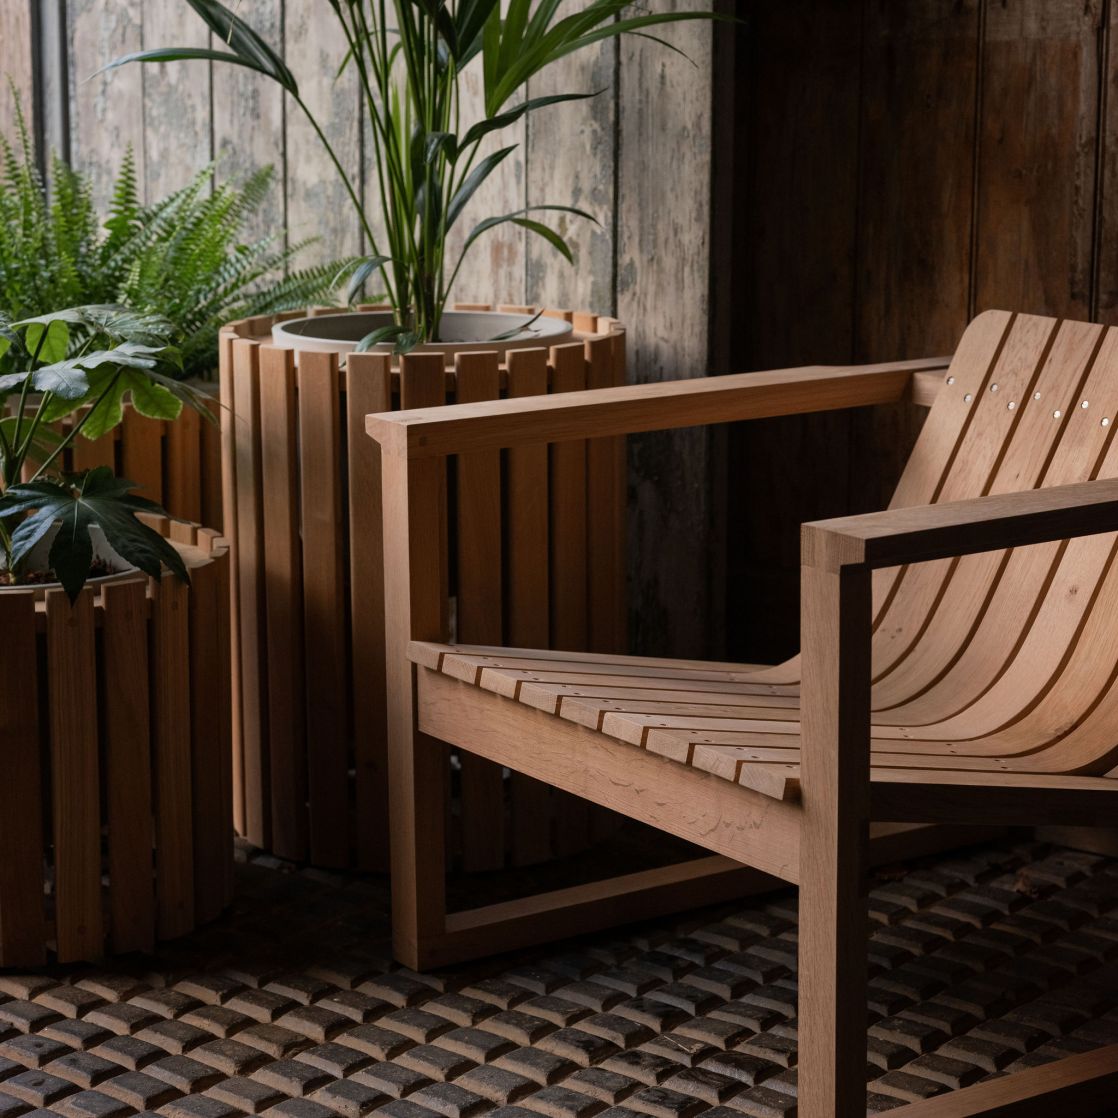 wooden planters and wooden chair